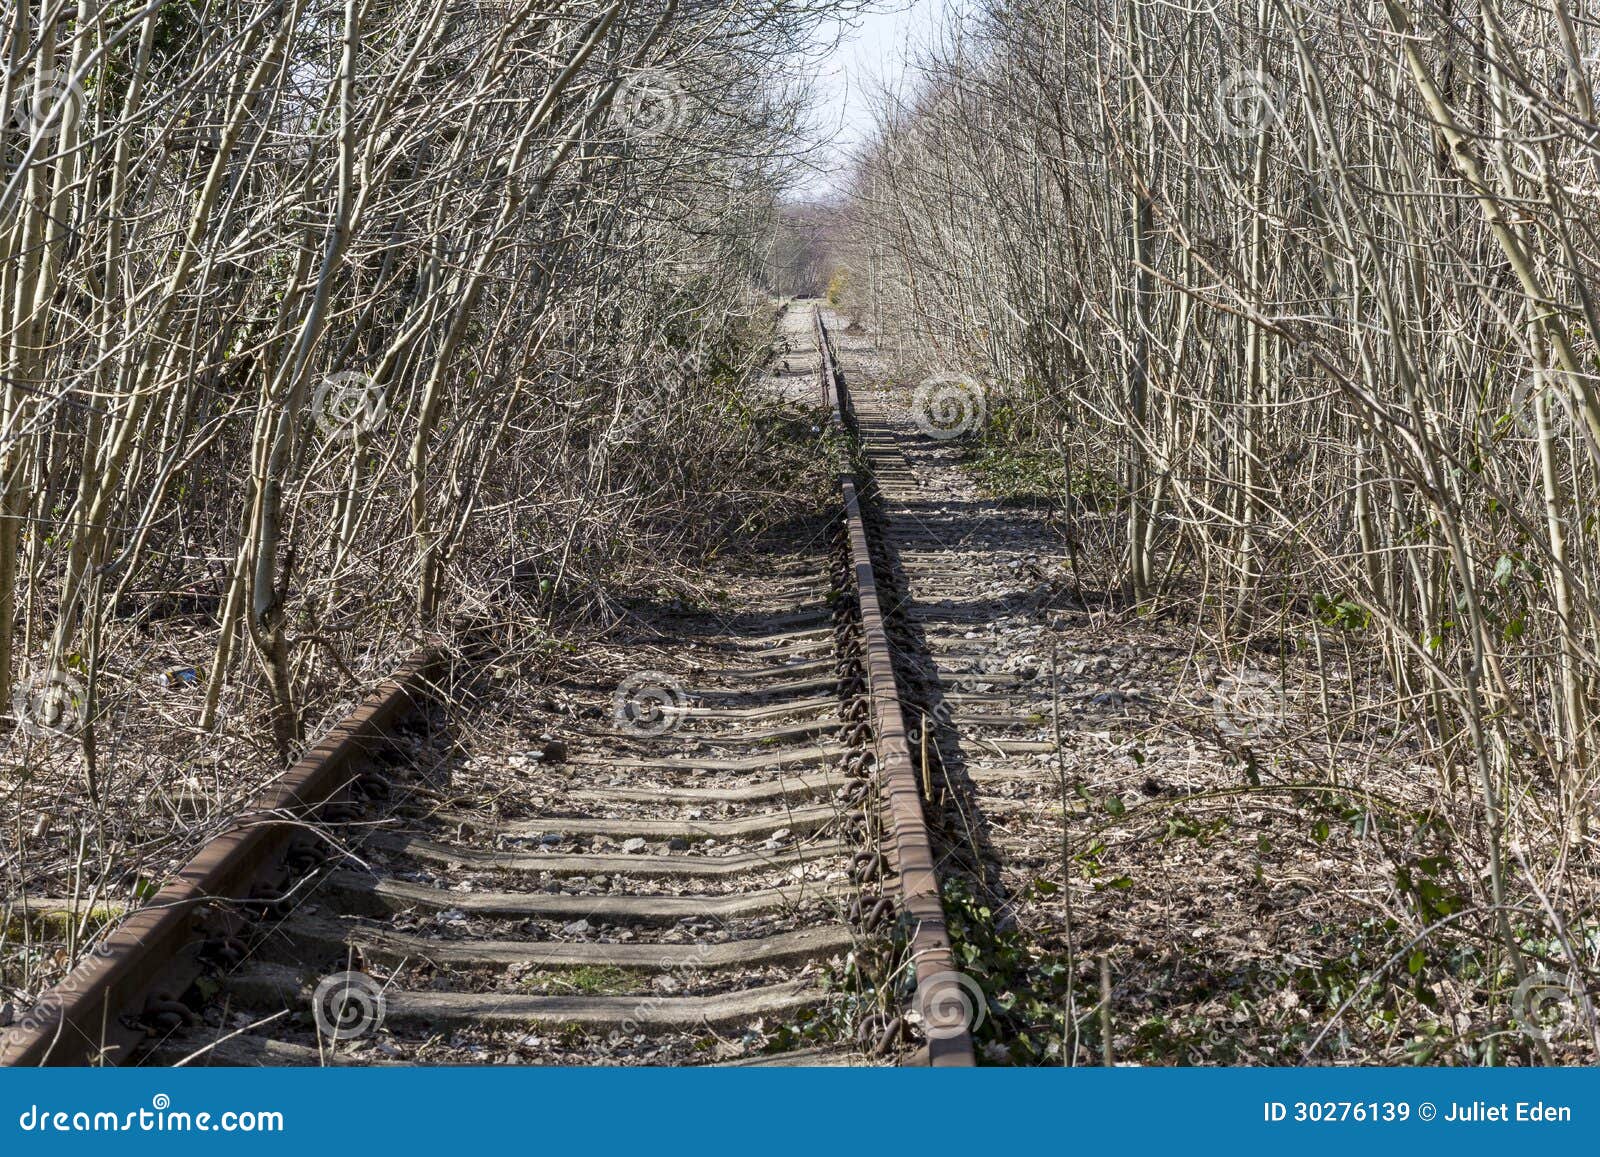 Overgrown Rail Track Royalty Free Stock Images - Image: 30276139